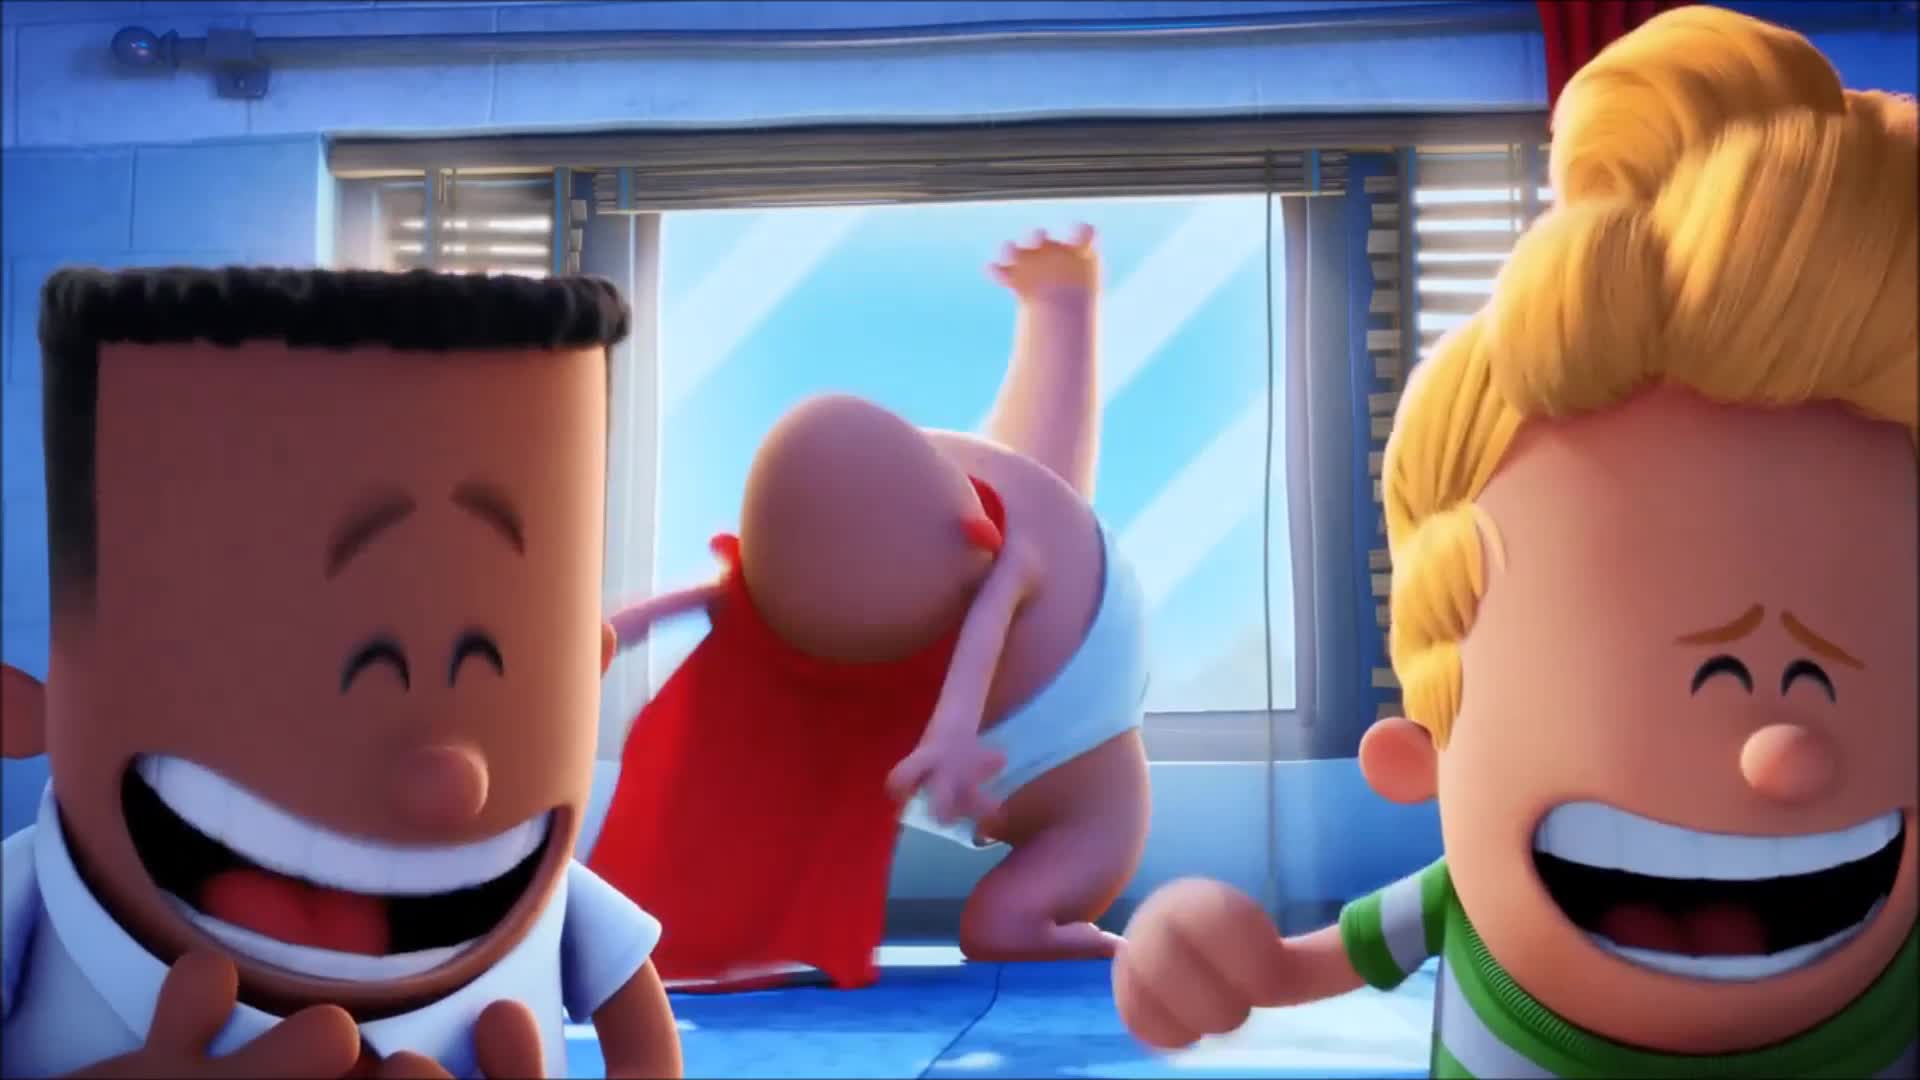 ‘Captain Underpants’ is epic family fun New York Amsterdam News The